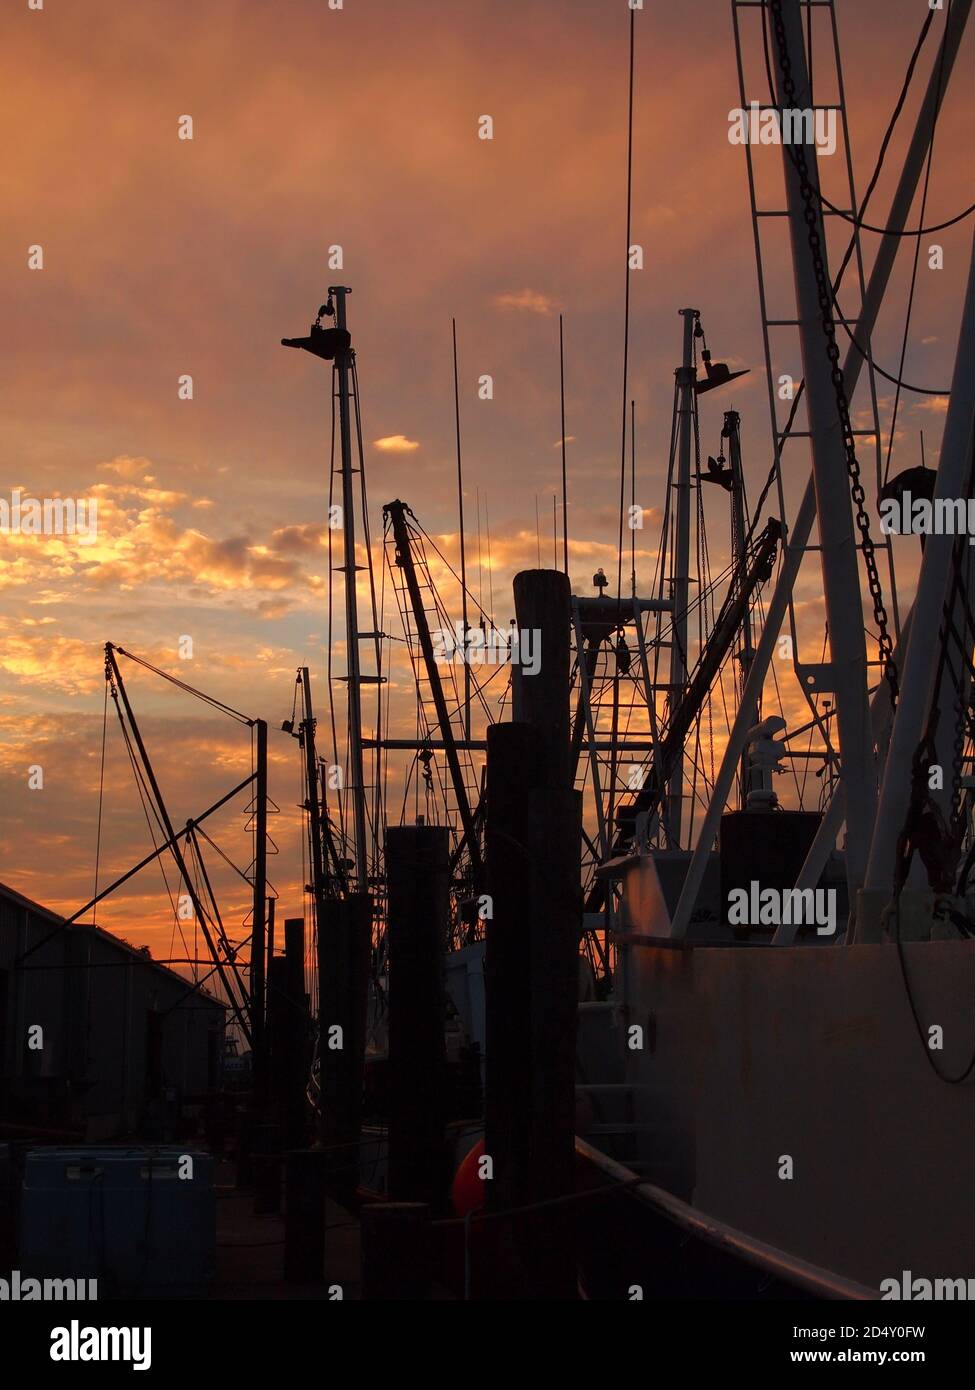 Fishing boat rigging in deep silhouette after sunset against a warm sky with red, yellow and orange clouds. Stock Photo